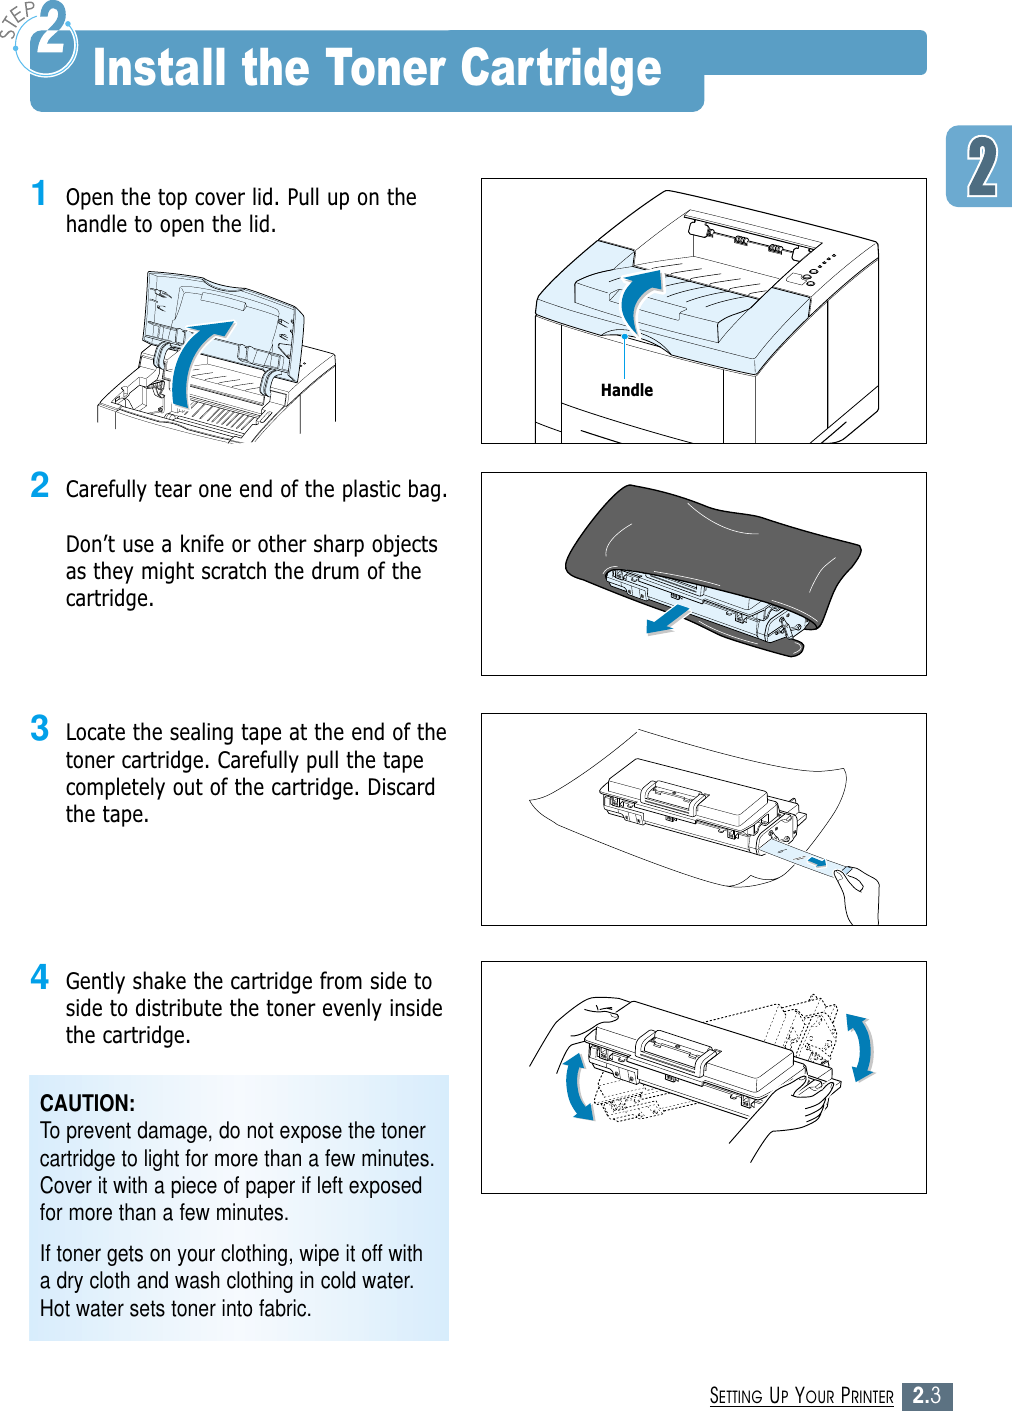 2.3SETTING UP YOUR PRINTER1Open the top cover lid. Pull up on thehandle to open the lid.2Carefully tear one end of the plastic bag. Don’t use a knife or other sharp objectsas they might scratch the drum of thecartridge.3Locate the sealing tape at the end of thetoner cartridge. Carefully pull the tapecompletely out of the cartridge. Discardthe tape.4Gently shake the cartridge from side toside to distribute the toner evenly insidethe cartridge.CAUTION:To prevent damage, do not expose the tonercartridge to light for more than a few minutes.Cover it with a piece of paper if left exposedfor more than a few minutes.If toner gets on your clothing, wipe it off witha dry cloth and wash clothing in cold water.Hot water sets toner into fabric.Install the Toner CartridgeHandle